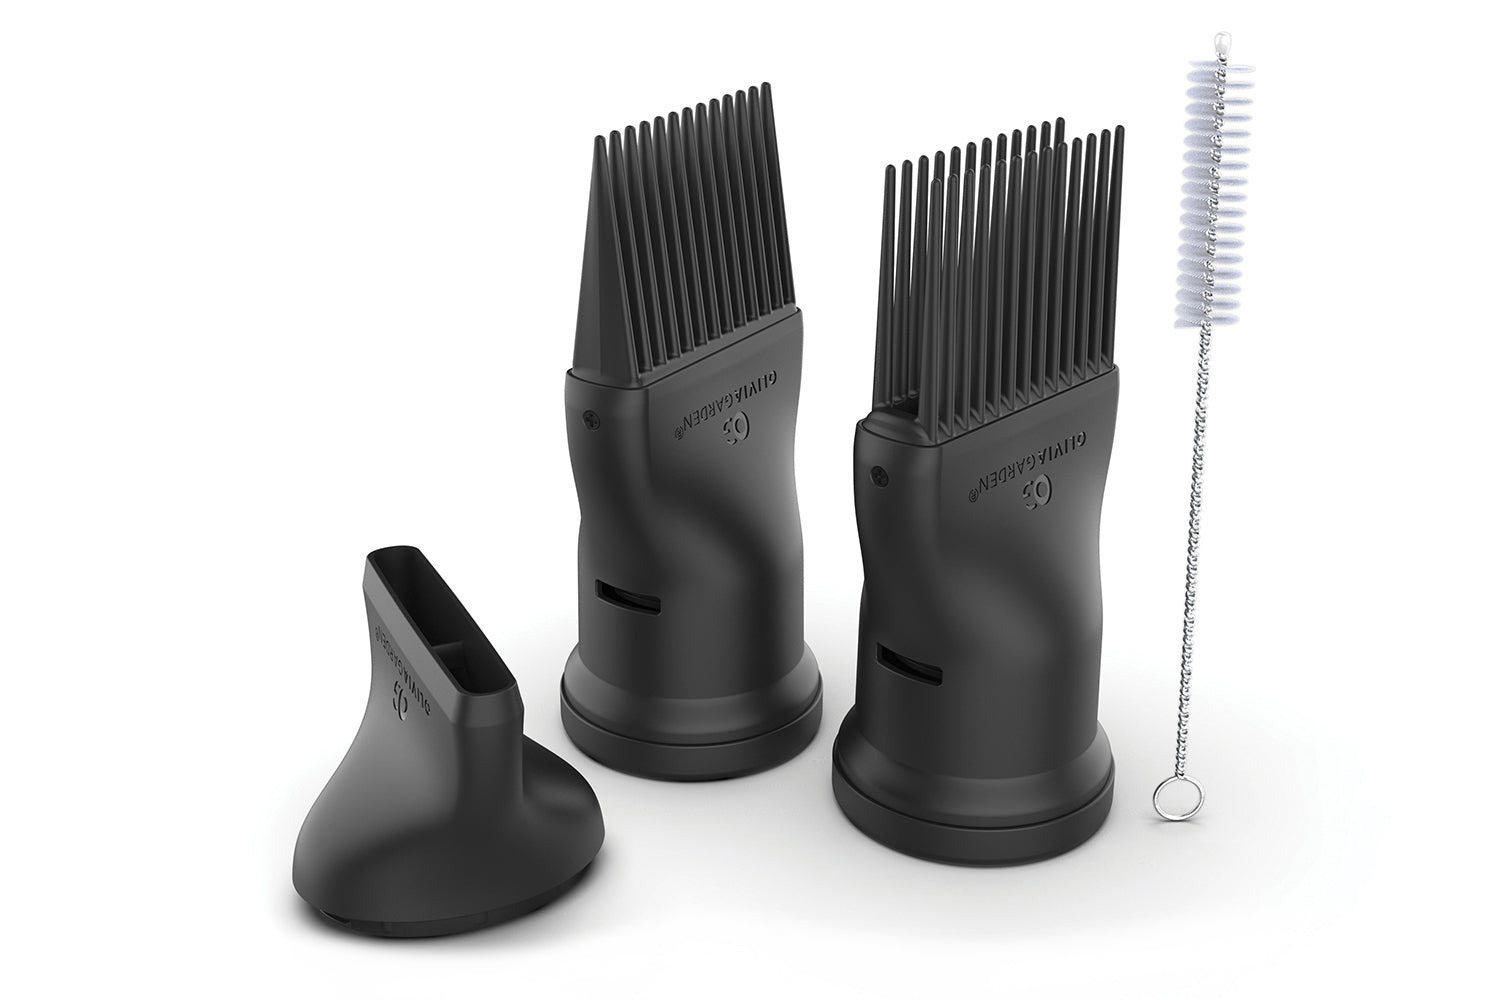 Fine-tooth & wide-tooth comb attachments, 2 3/4” Concentrator nozzle & Cleaning brush